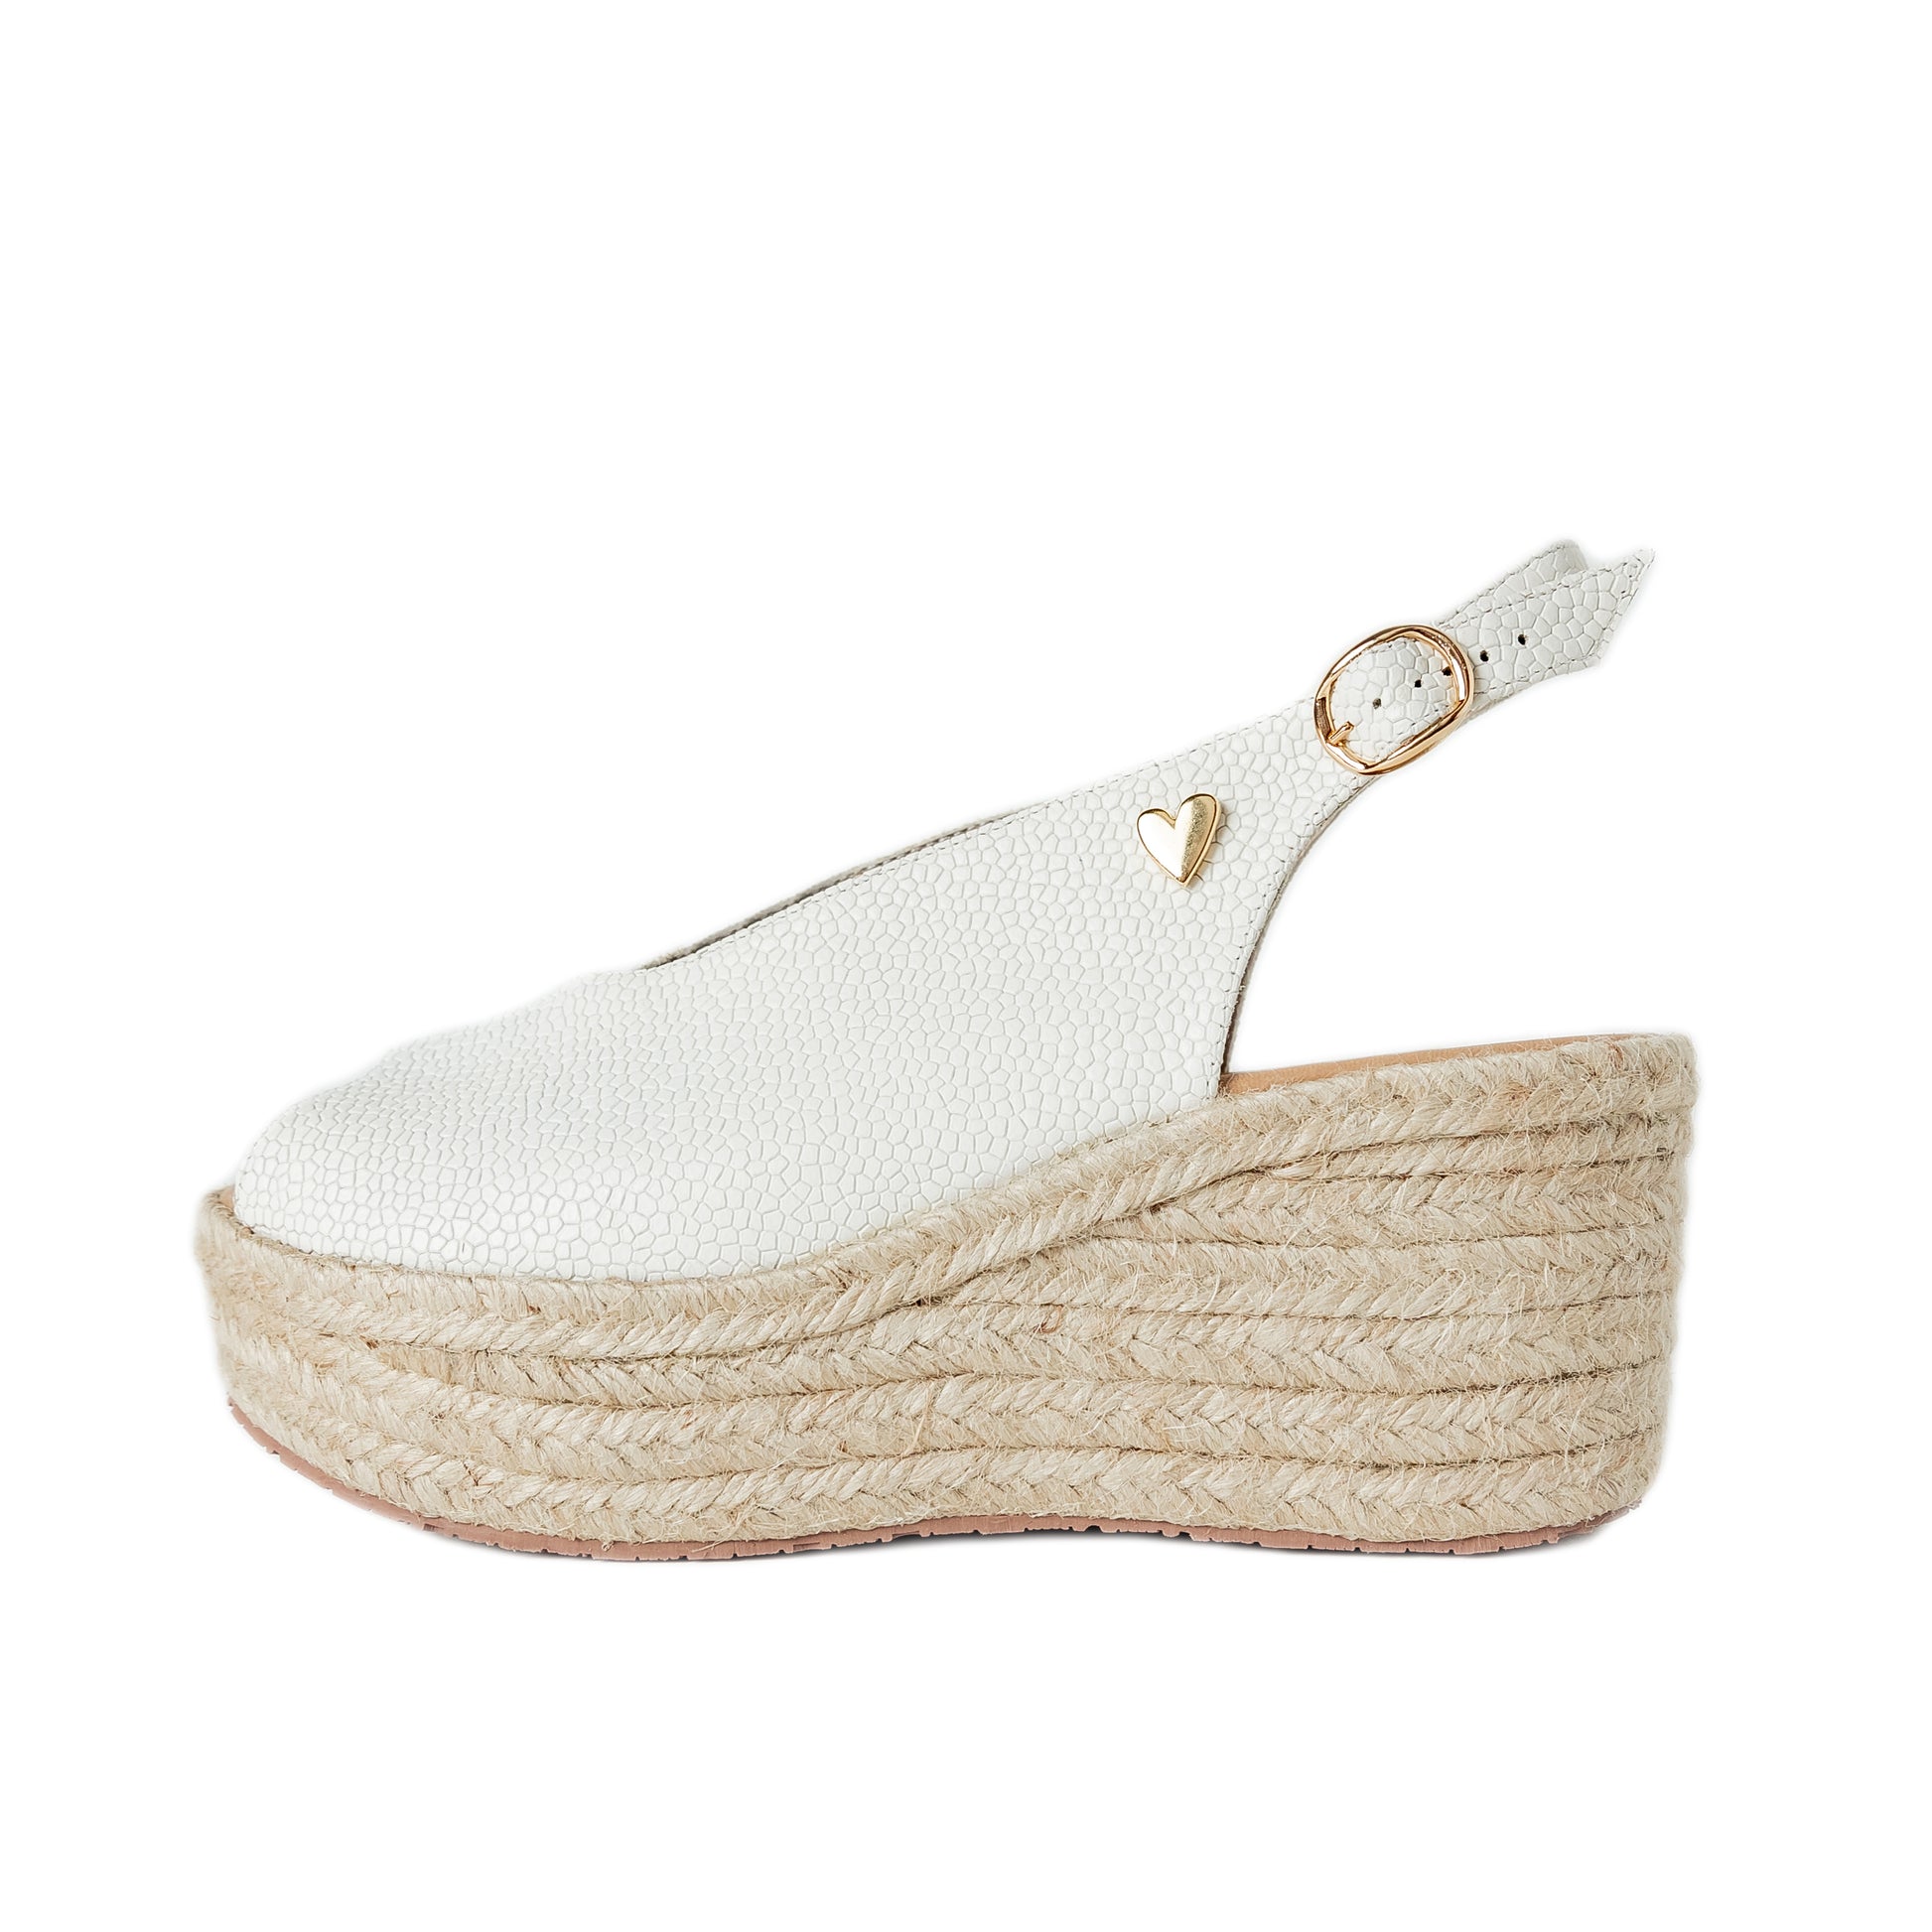 Sandal Tarah Espadrilles by Nataly Mendez.  Genuine leather upper material Leather insole lining Flexible rubber sole Handmade 3 inch heel height 1.75 inch platform